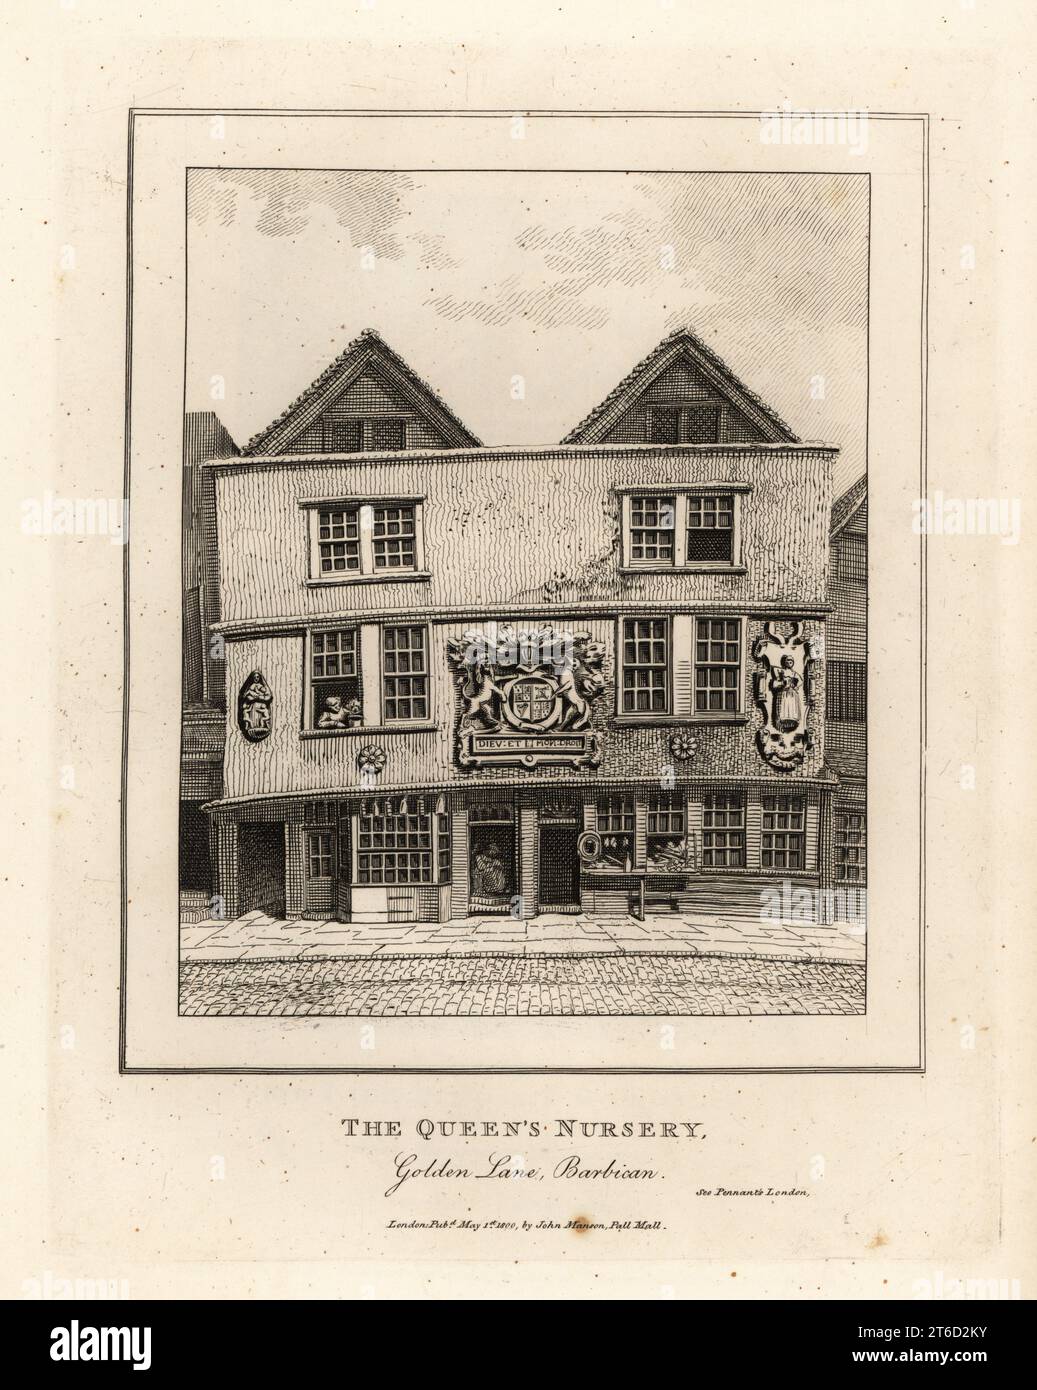 The Queens Nursery, Golden Lane, Barbican. Tudor building that housed the children of King Henry VIII and was the nursery of Queen Elizabeth I. Royal coat of arms over entrance. Copperplate engraving by John Thomas Smith after original drawings by members of the Society of Antiquaries from his J.T. Smiths Antiquities of London and its Environs, J. Sewell, R. Folder, J. Simco, London, 1800. Stock Photo